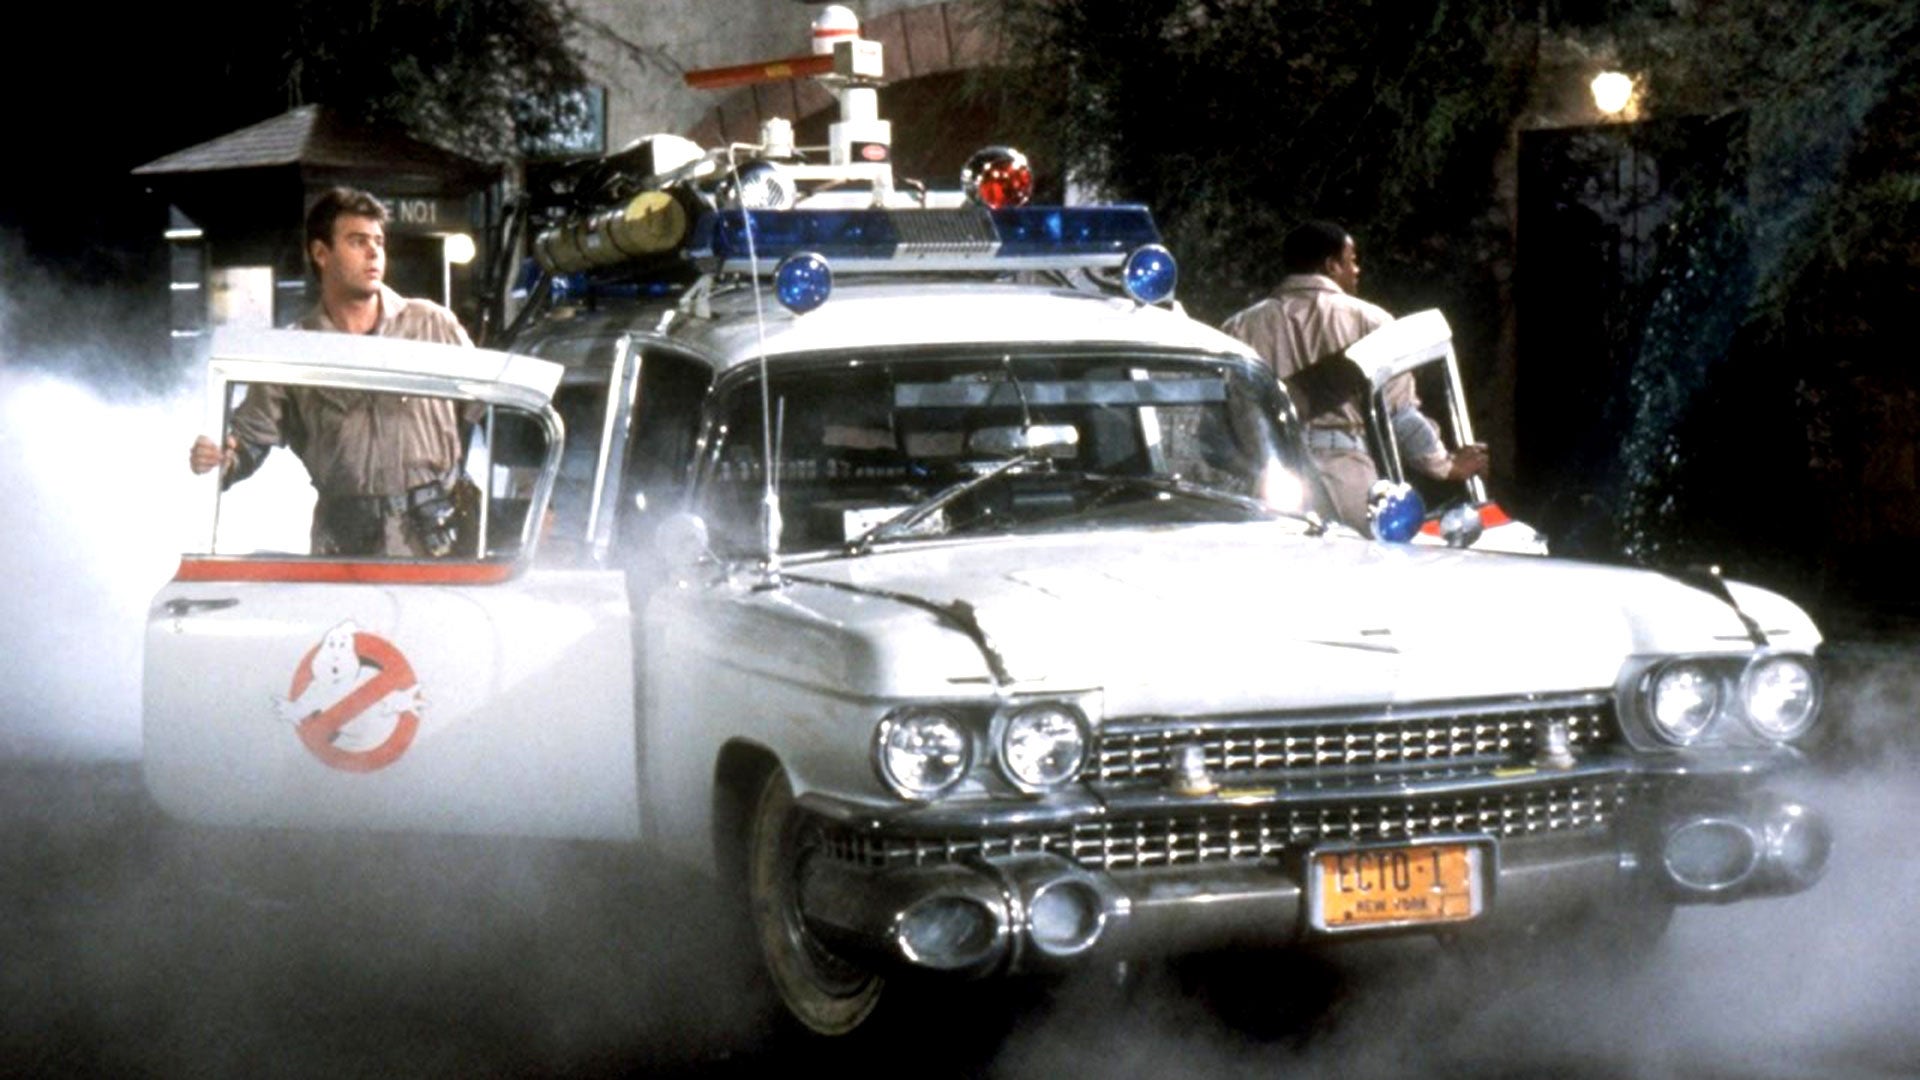 Ghostbusters arrive on the scene in Ecto-1